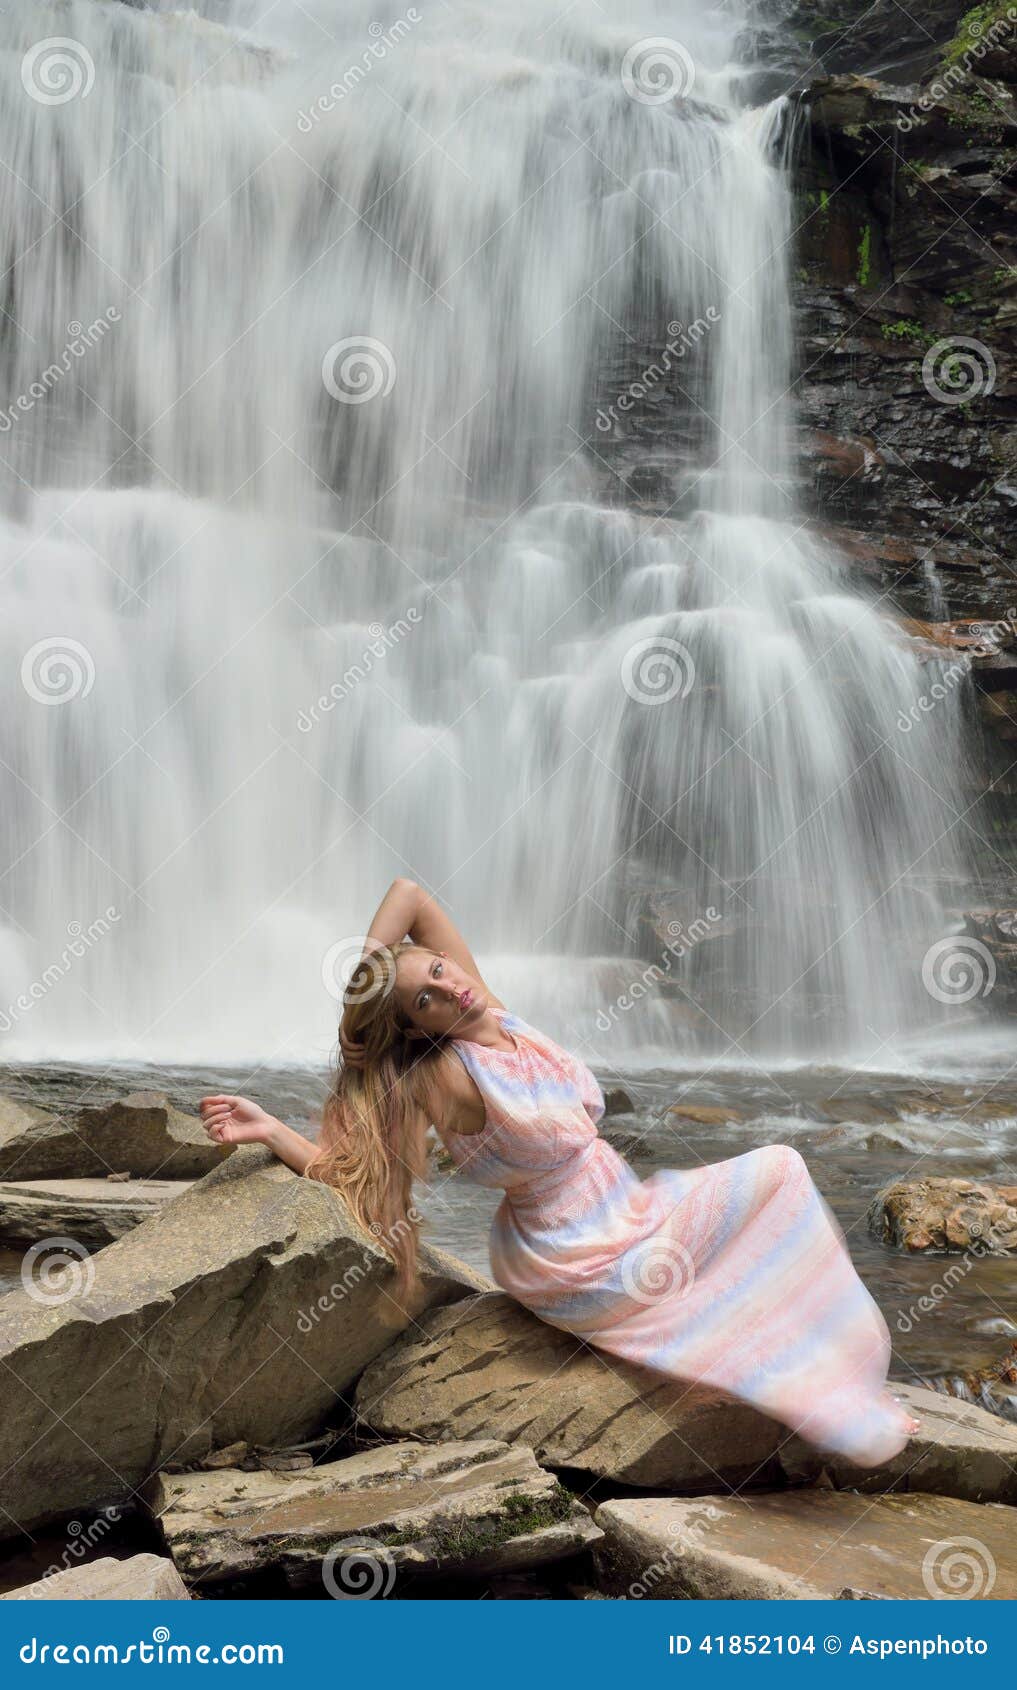 Premium Photo | Feel the moment. cute brunette sitting on big stone in  front of waterfall and posing on camera